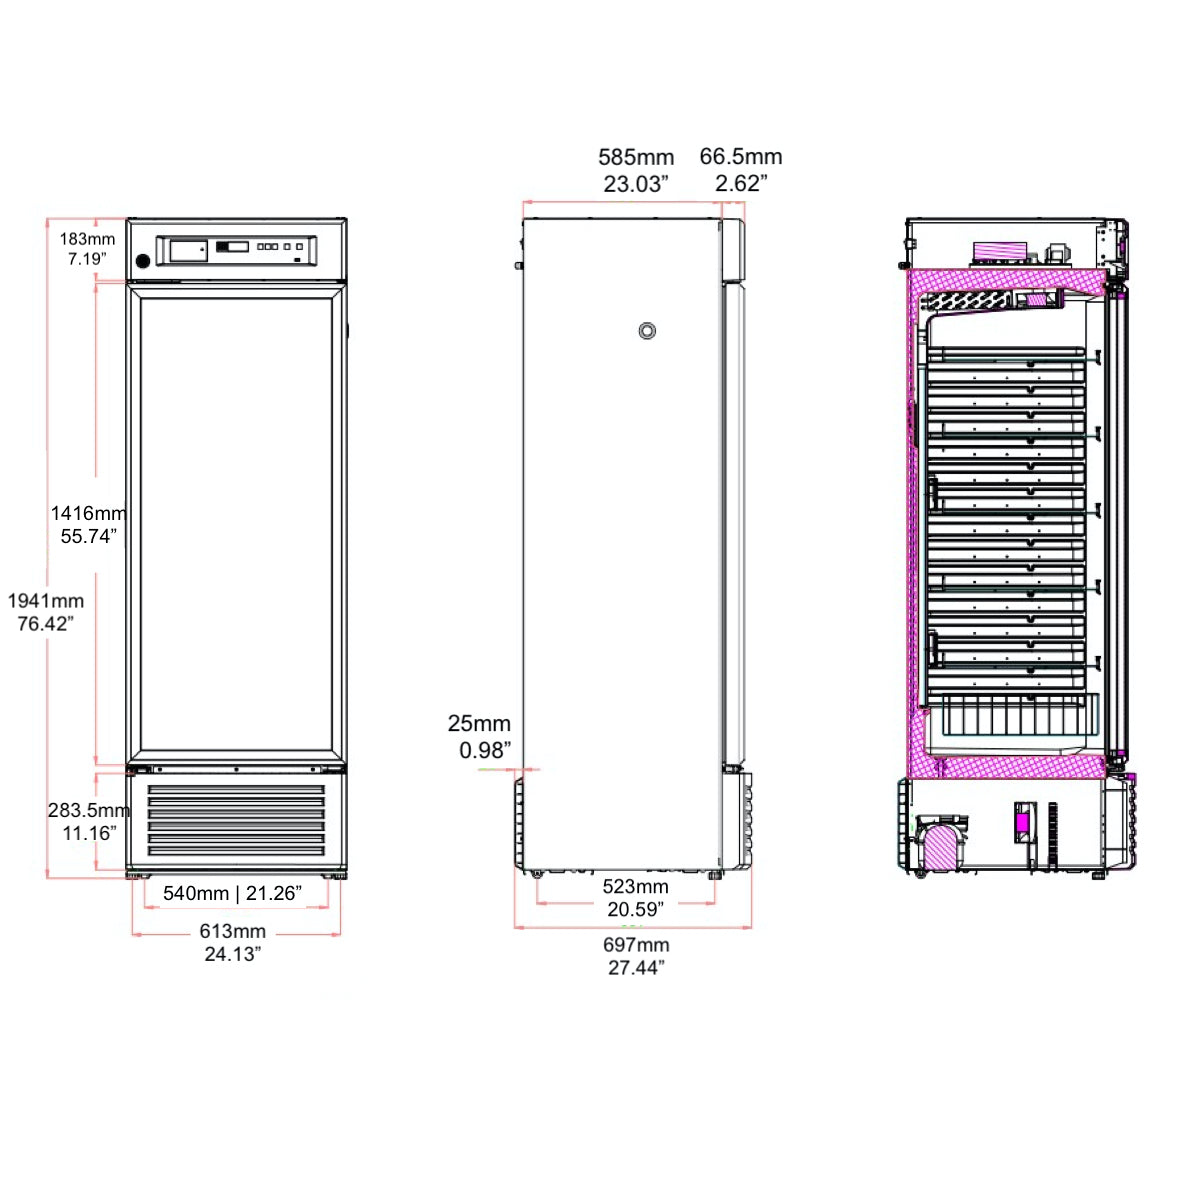 A diagram of a Kings Bottle -2℃ to 8℃ 395L upright medical refrigerator with adjustable shelves and a digital temperature display.